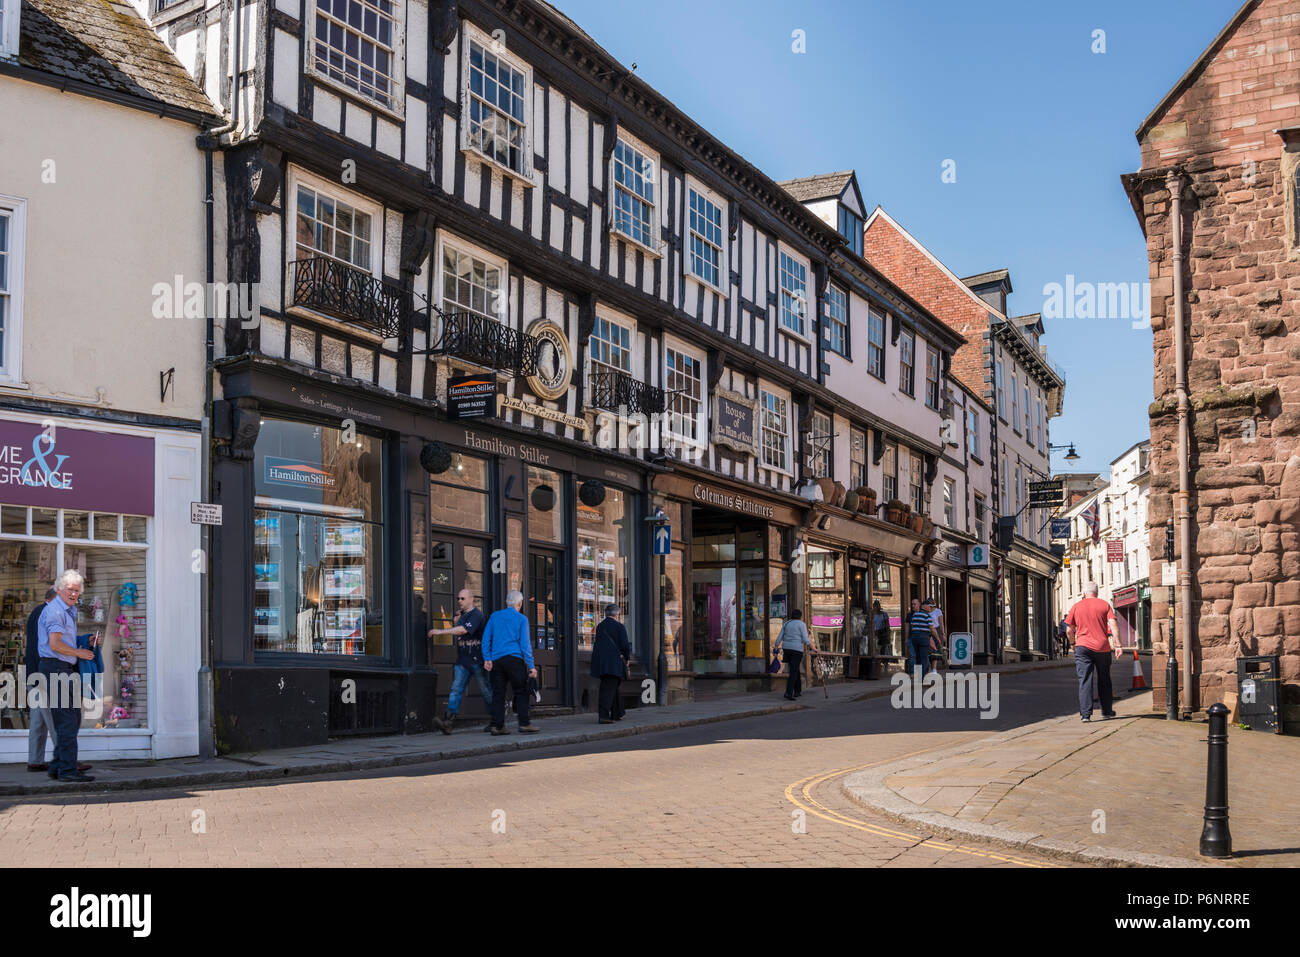 Pedestrians on the High Street, Ross on Wye, Herefordshire, UK Stock Photo